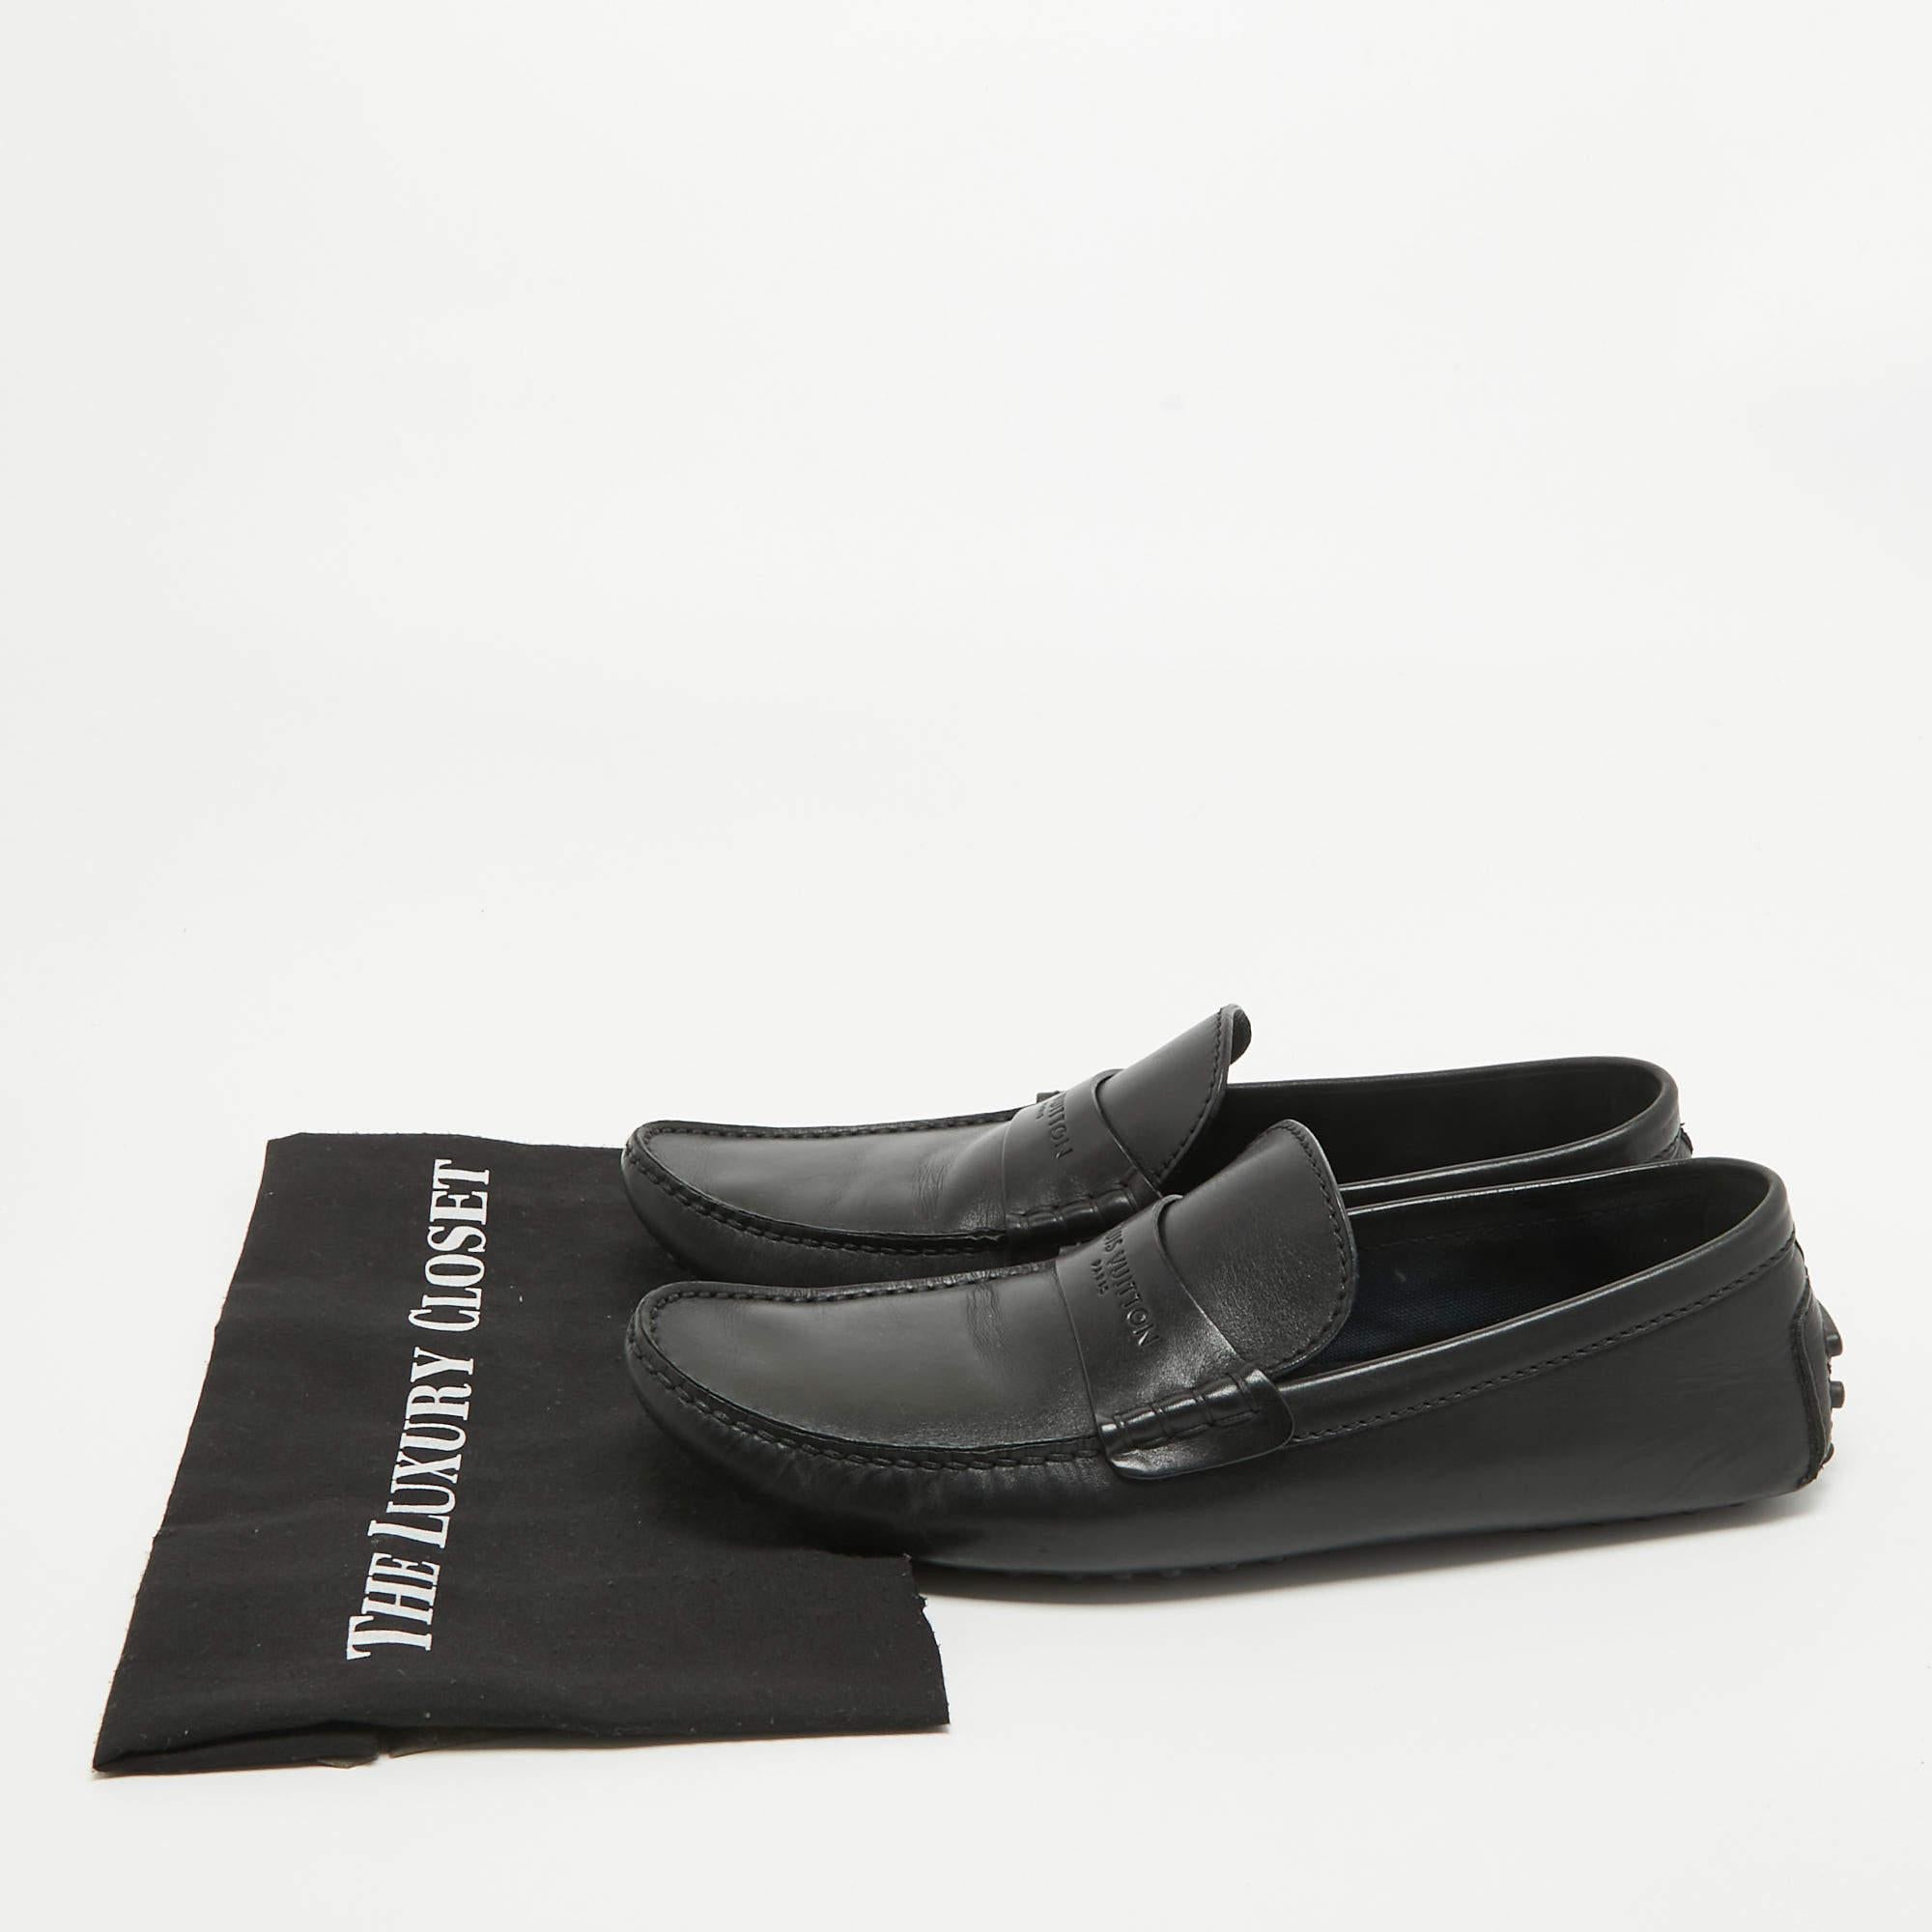 Louis Vuitton Black Leather Slip On Loafers Size 42.5 5